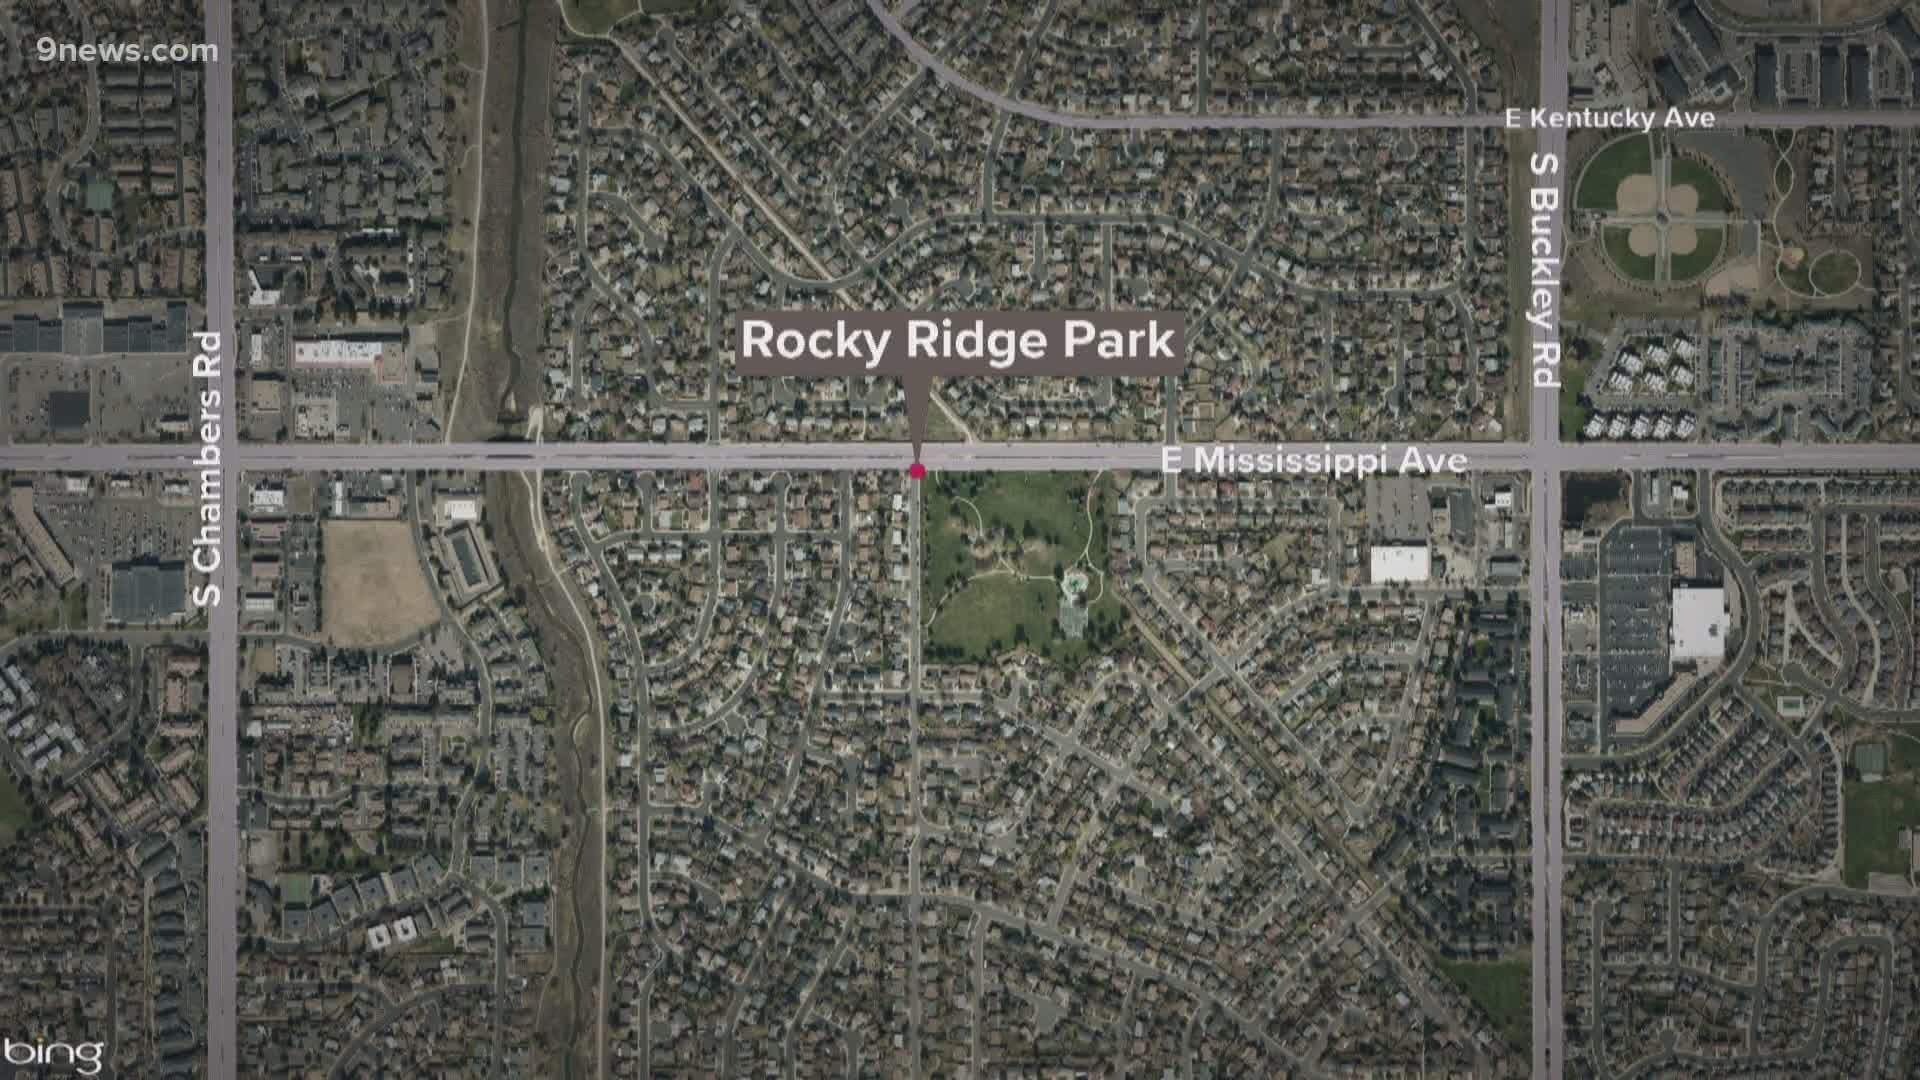 The shooting happened just before 9 p.m. at Rocky Ridge Park, located at 16300 E. Mississippi Ave.